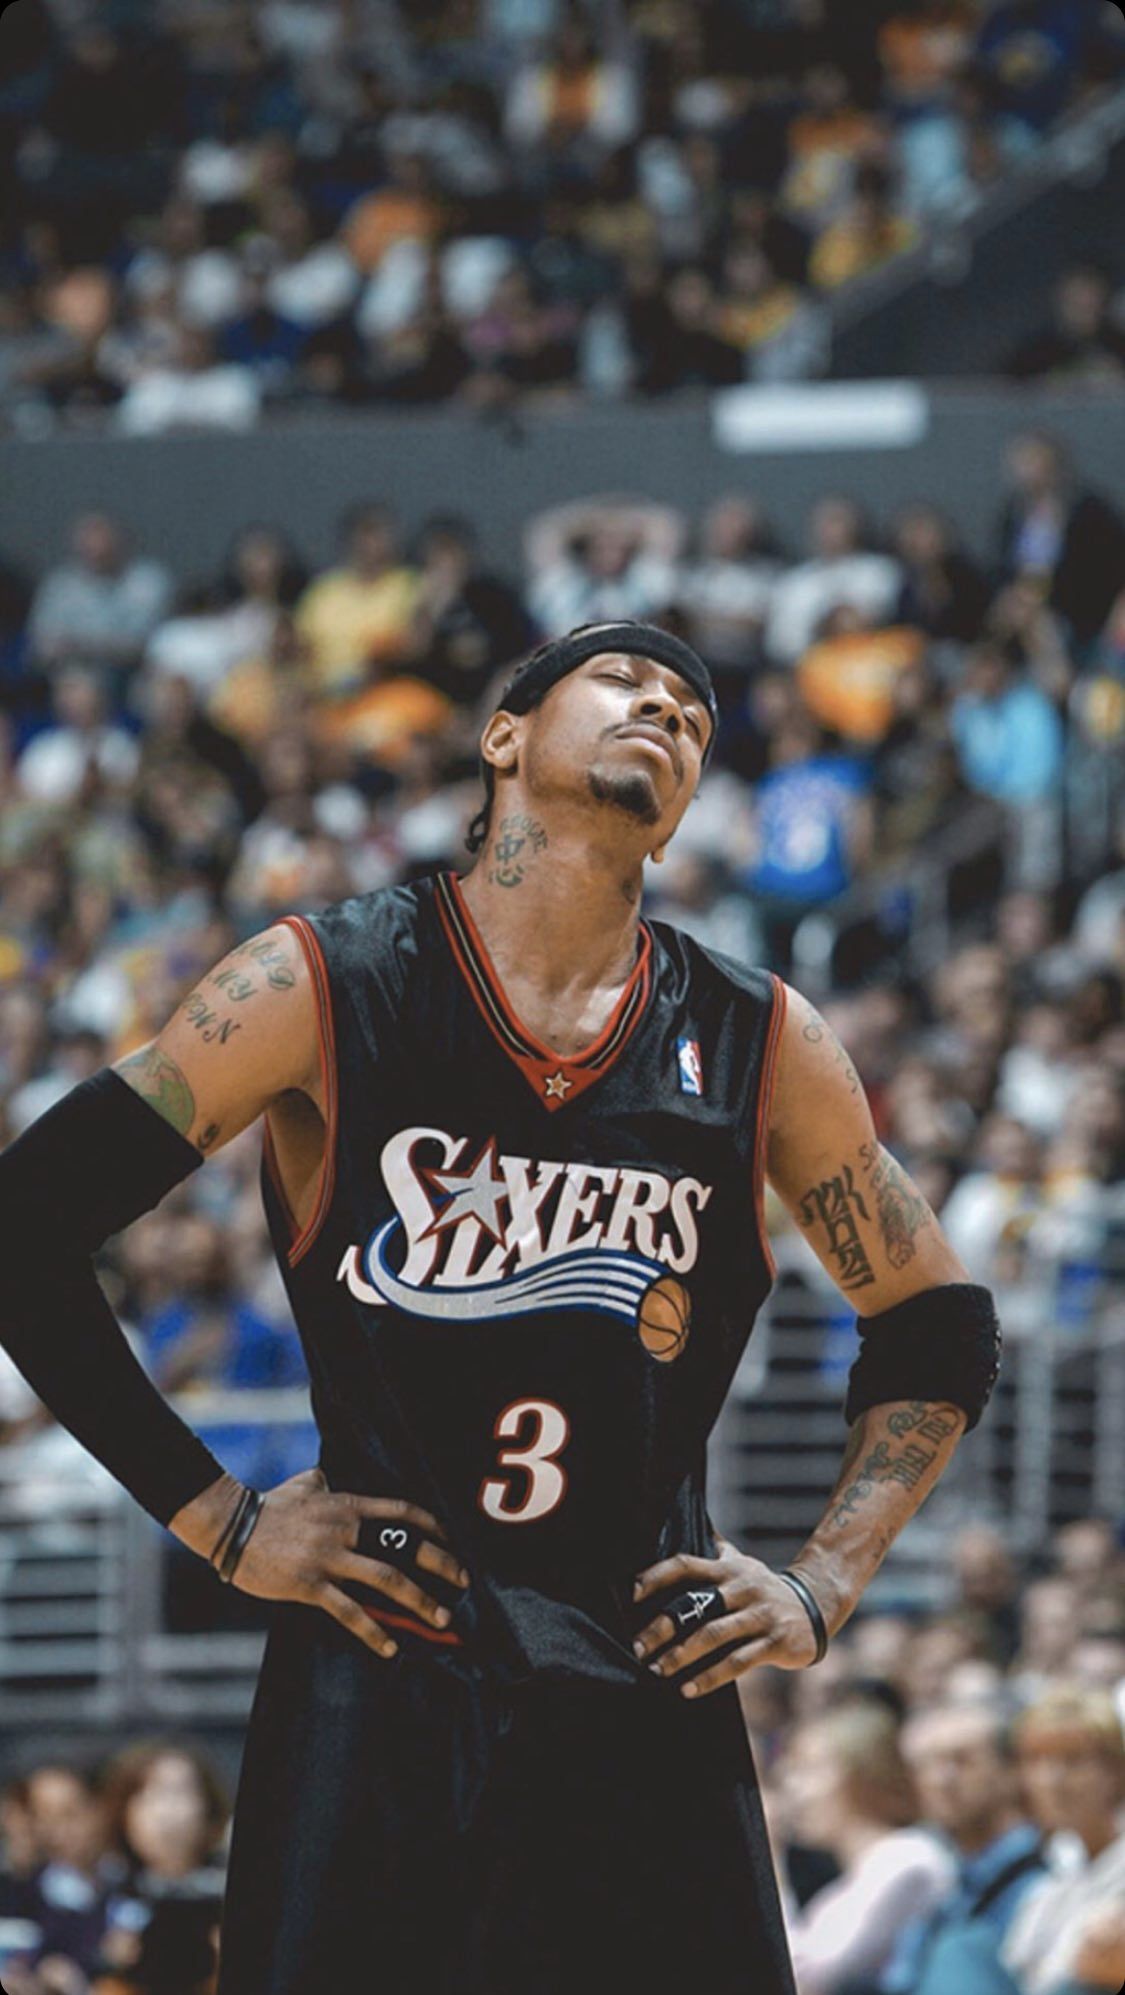 Allen iverson looking up at the scoreboard - NBA